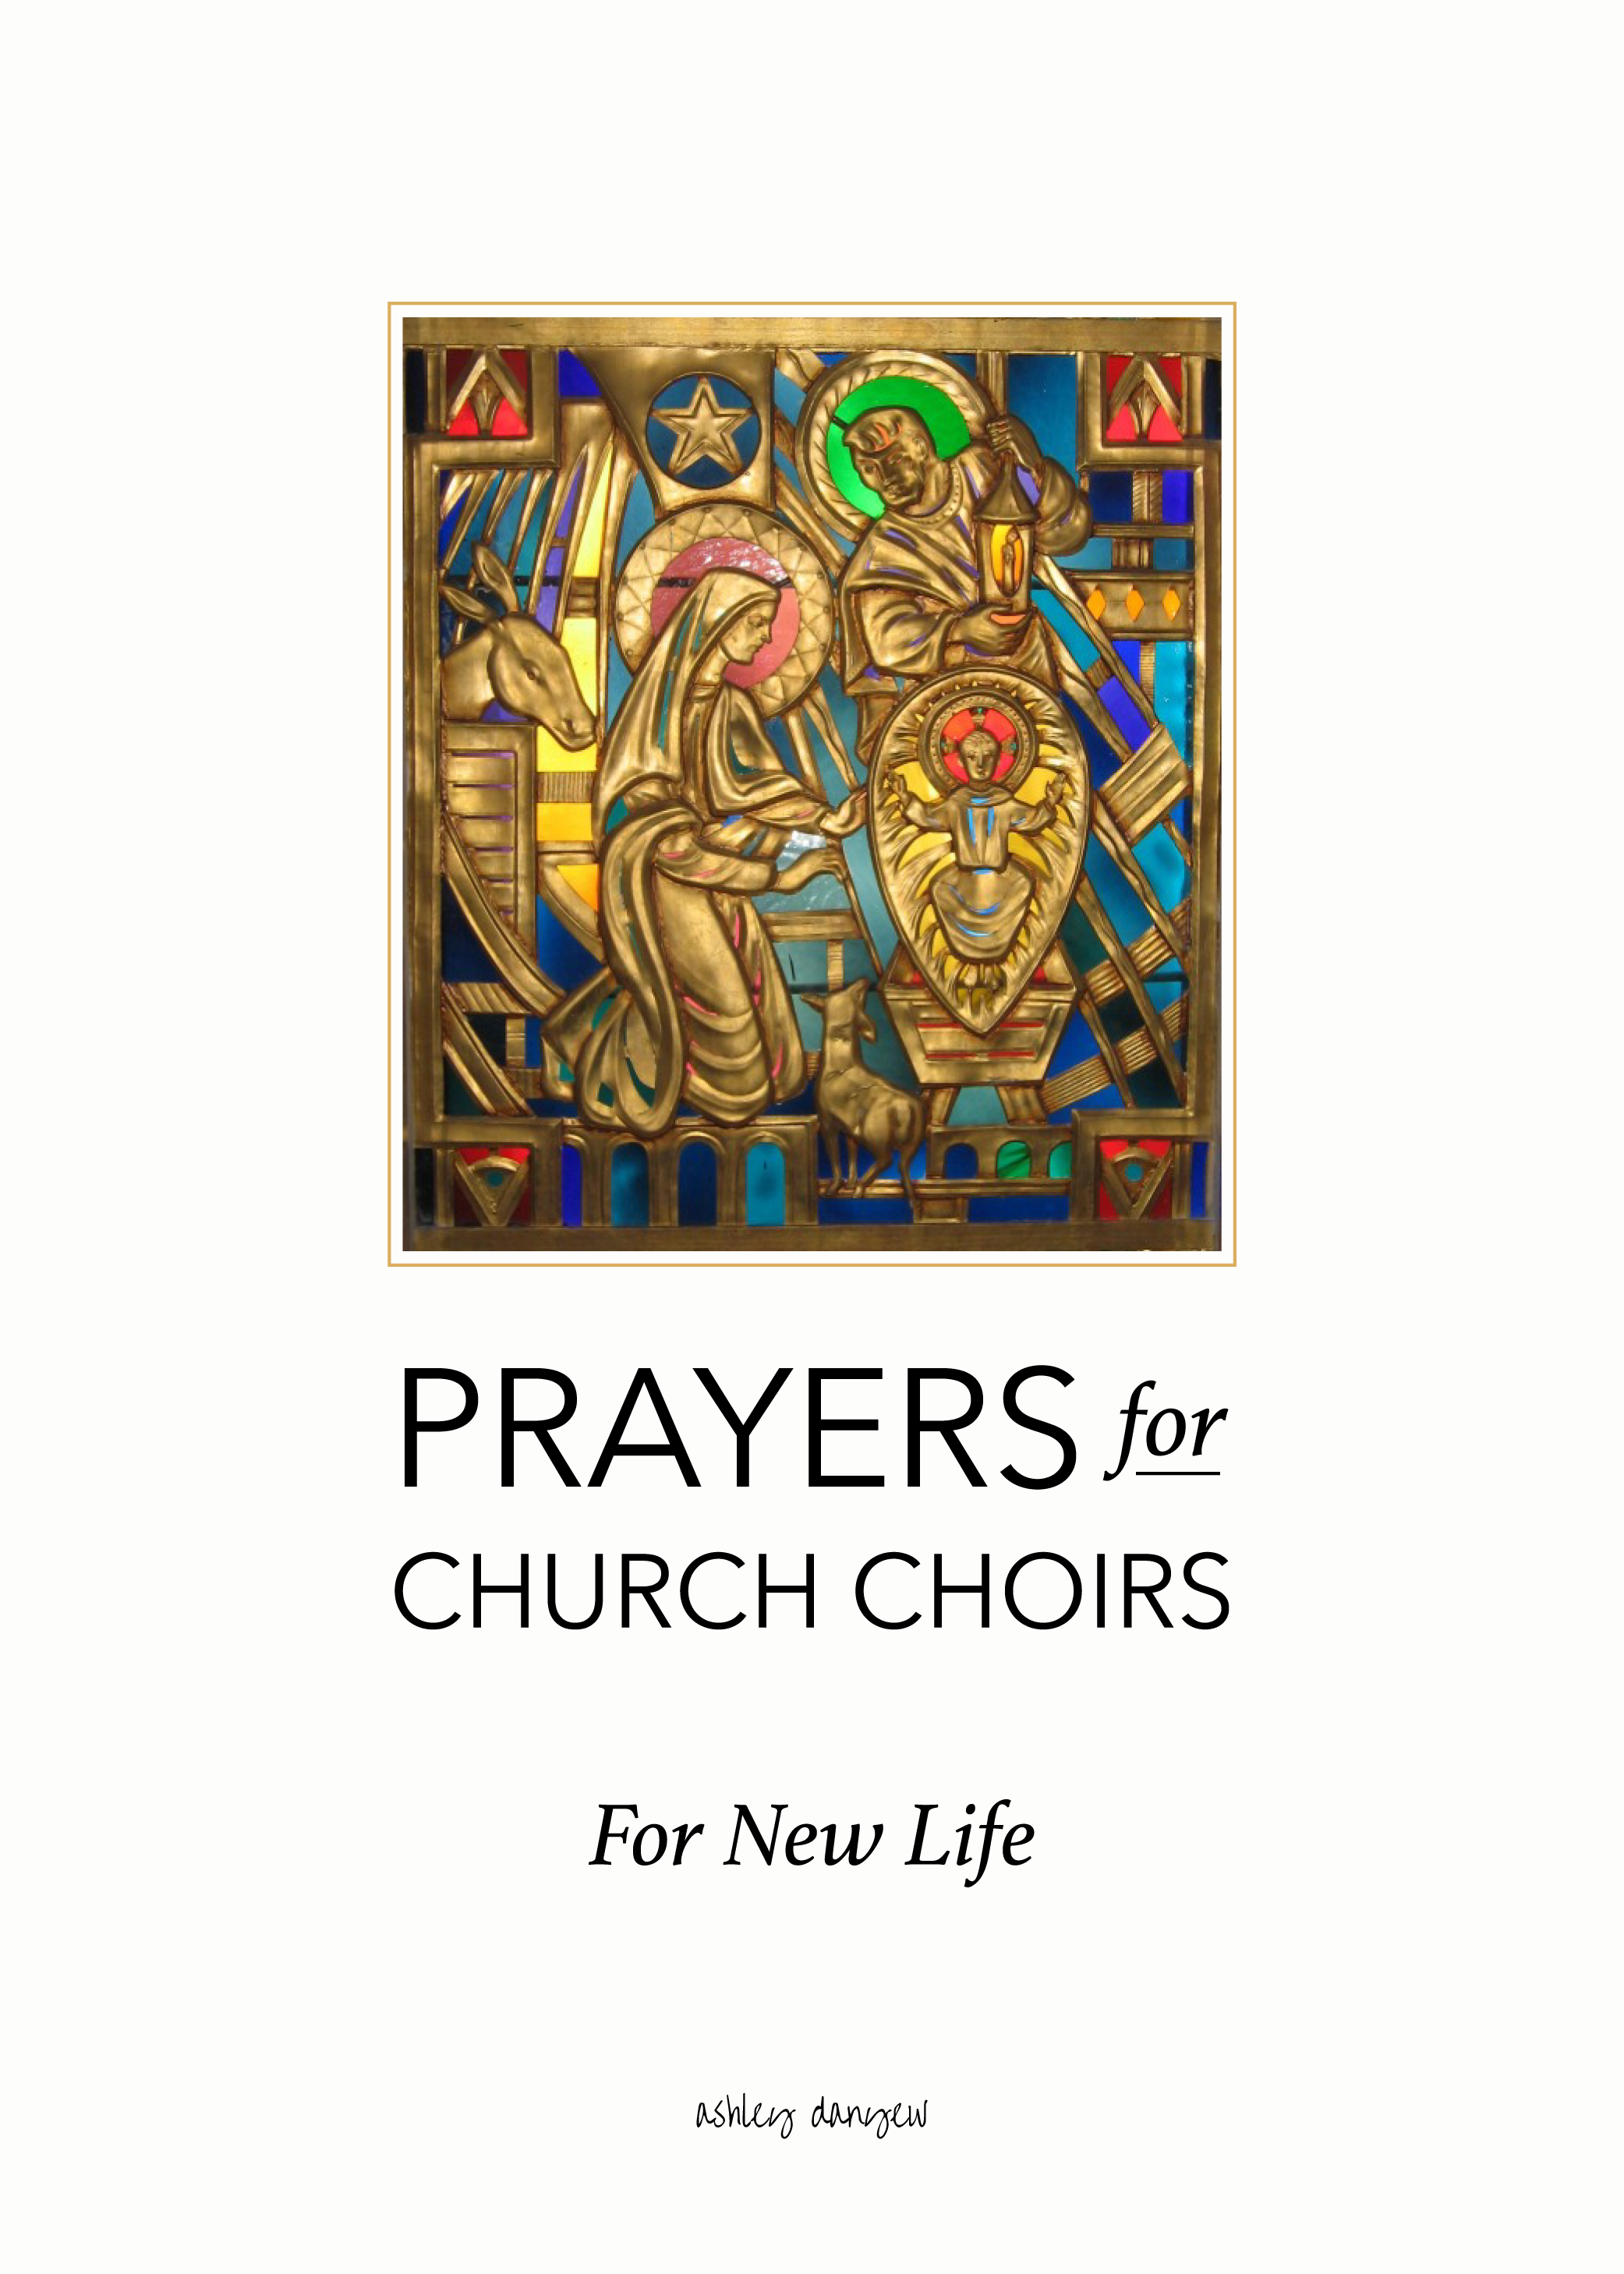 Copy of Prayers for Church Choirs: For New Life